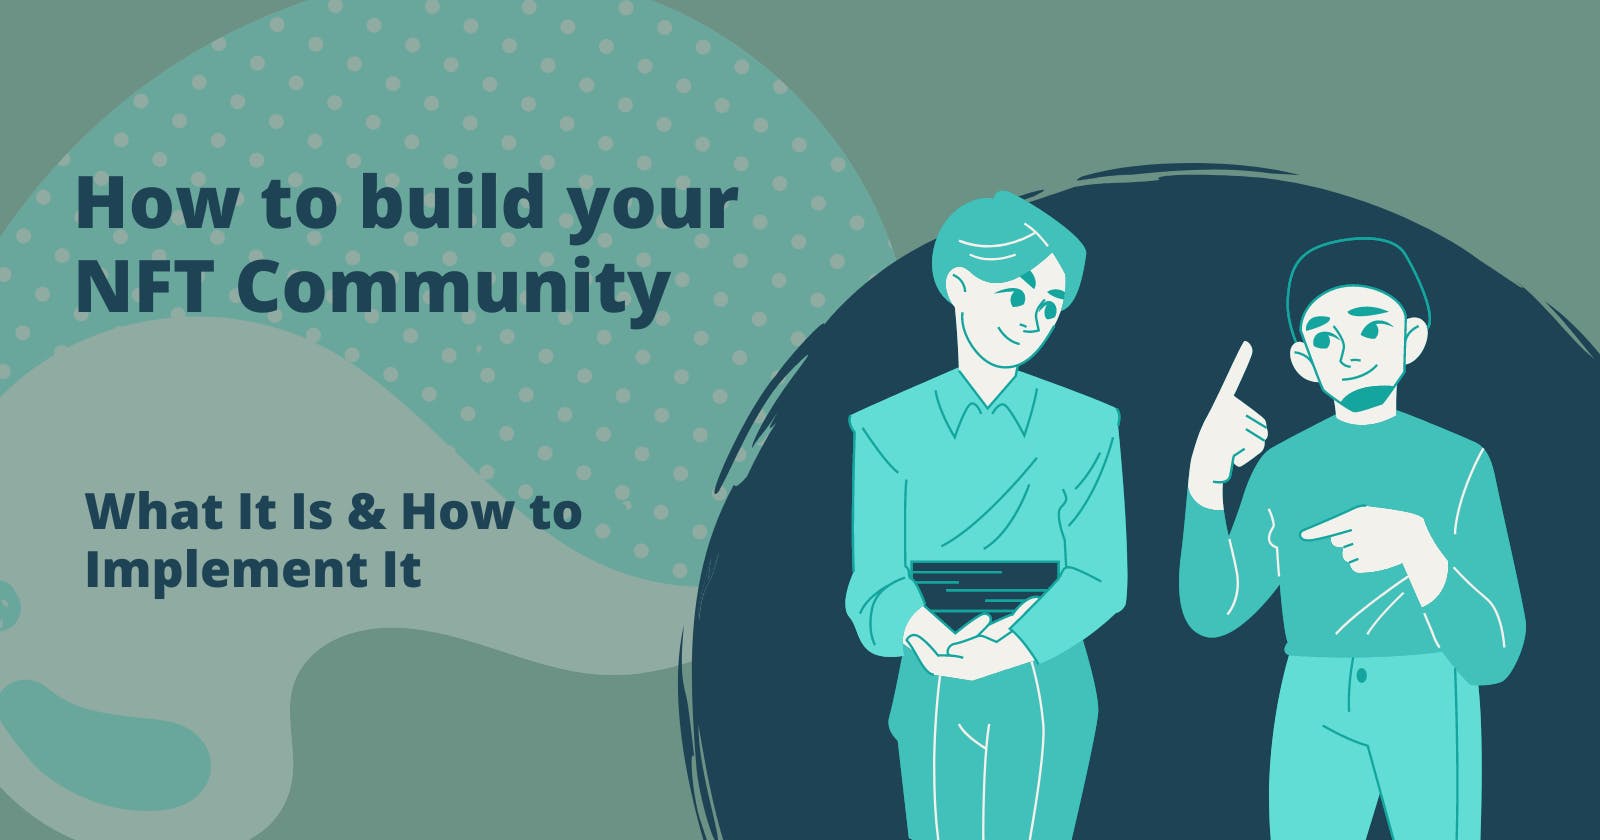 Looking to build your own NFT community? Here are some tips to get you started!